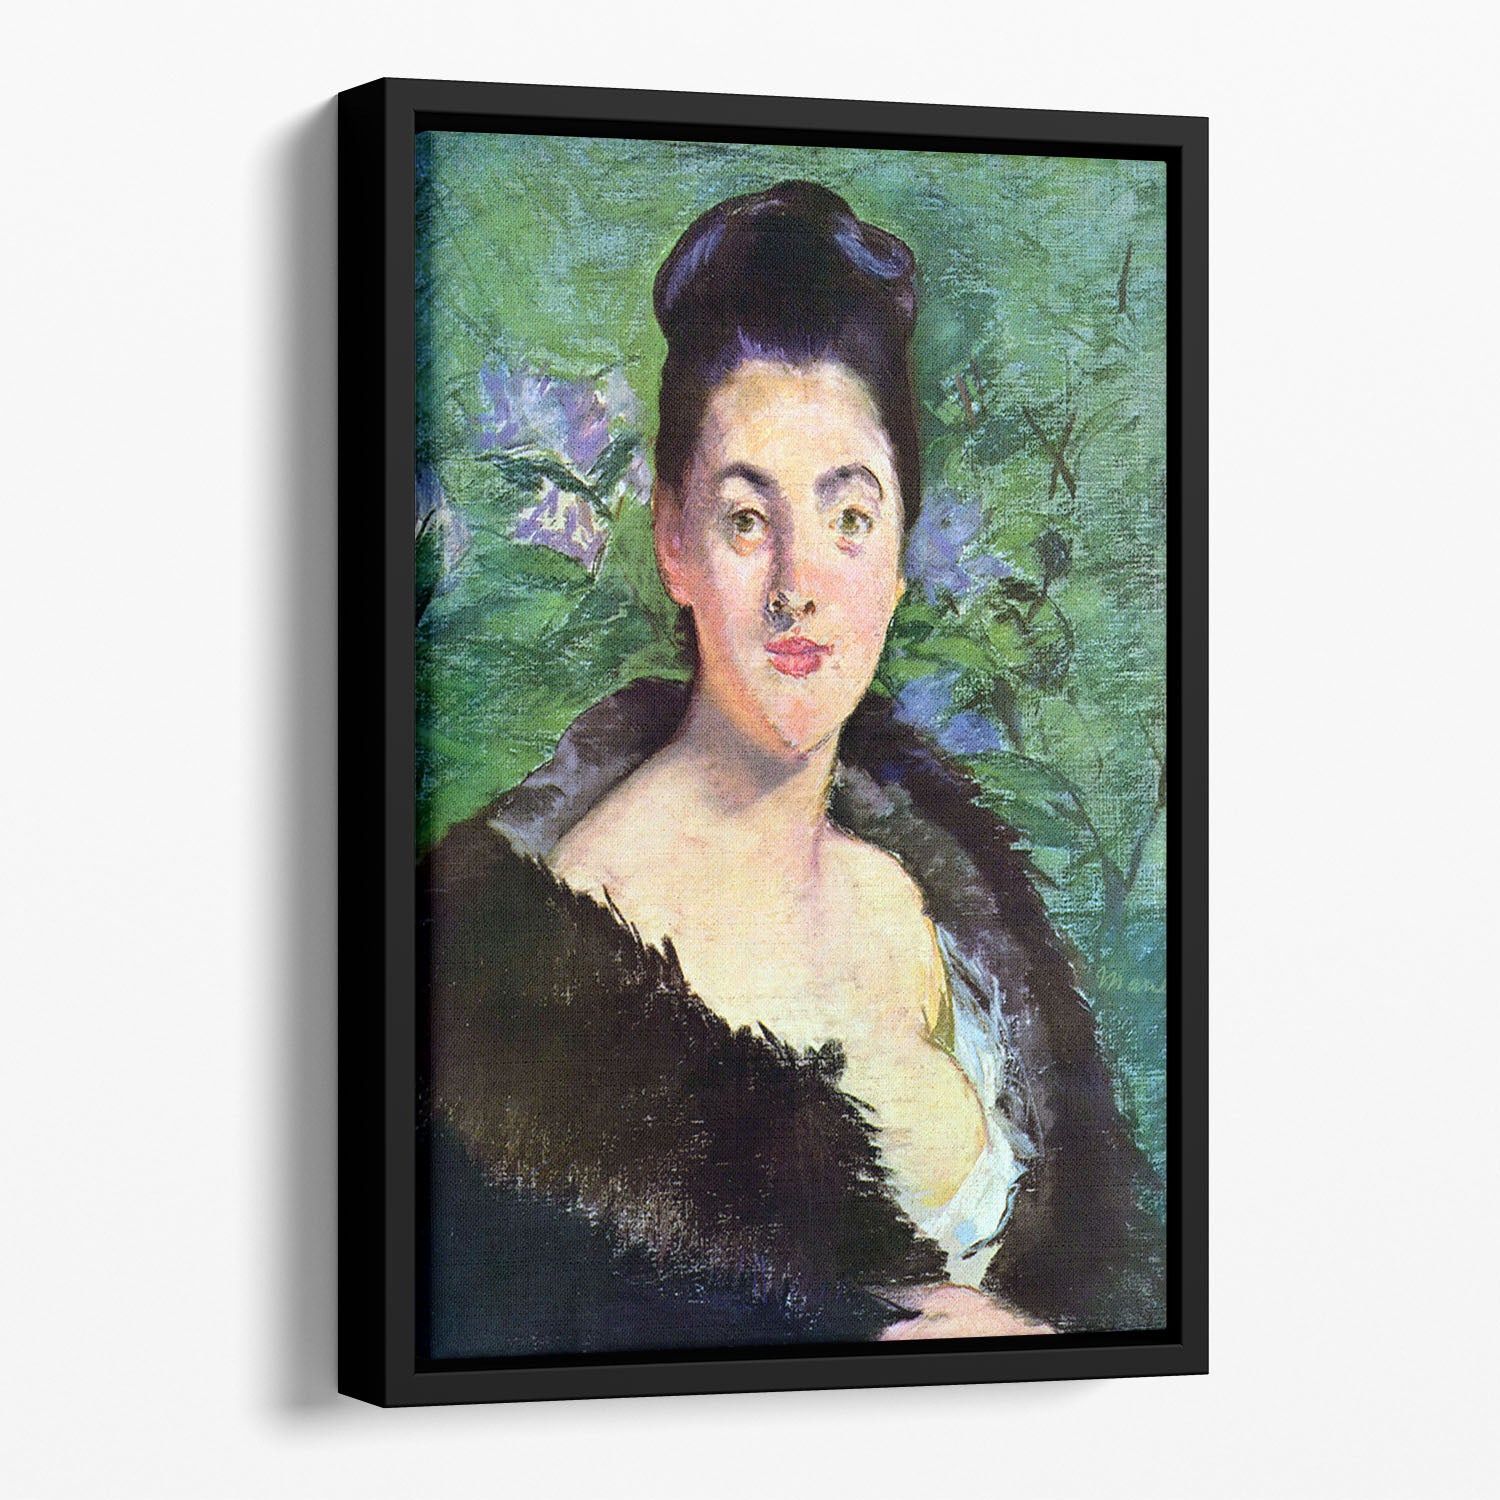 Lady in Fur by Manet Floating Framed Canvas